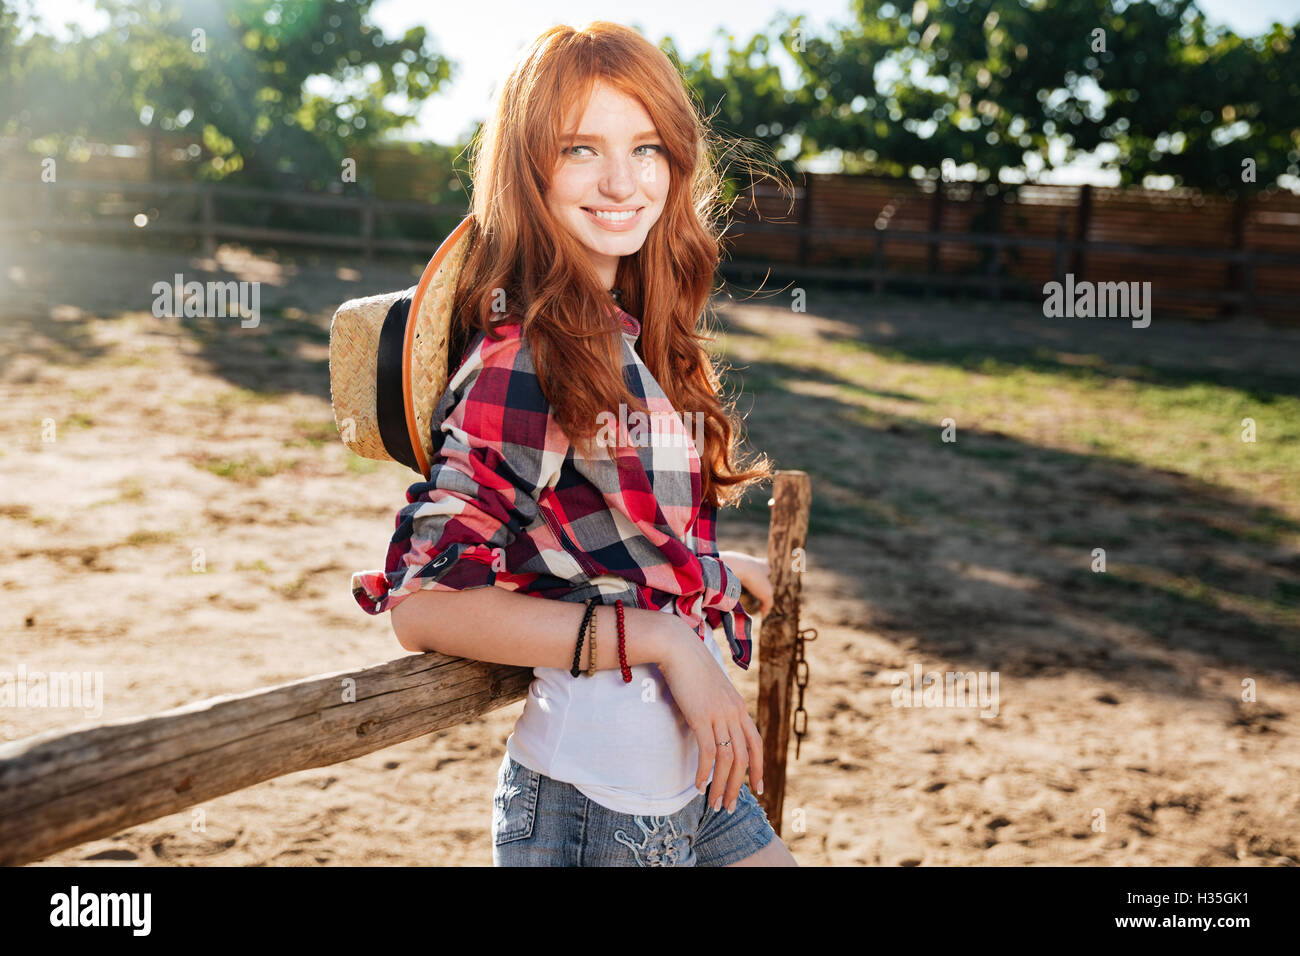 Country redhead